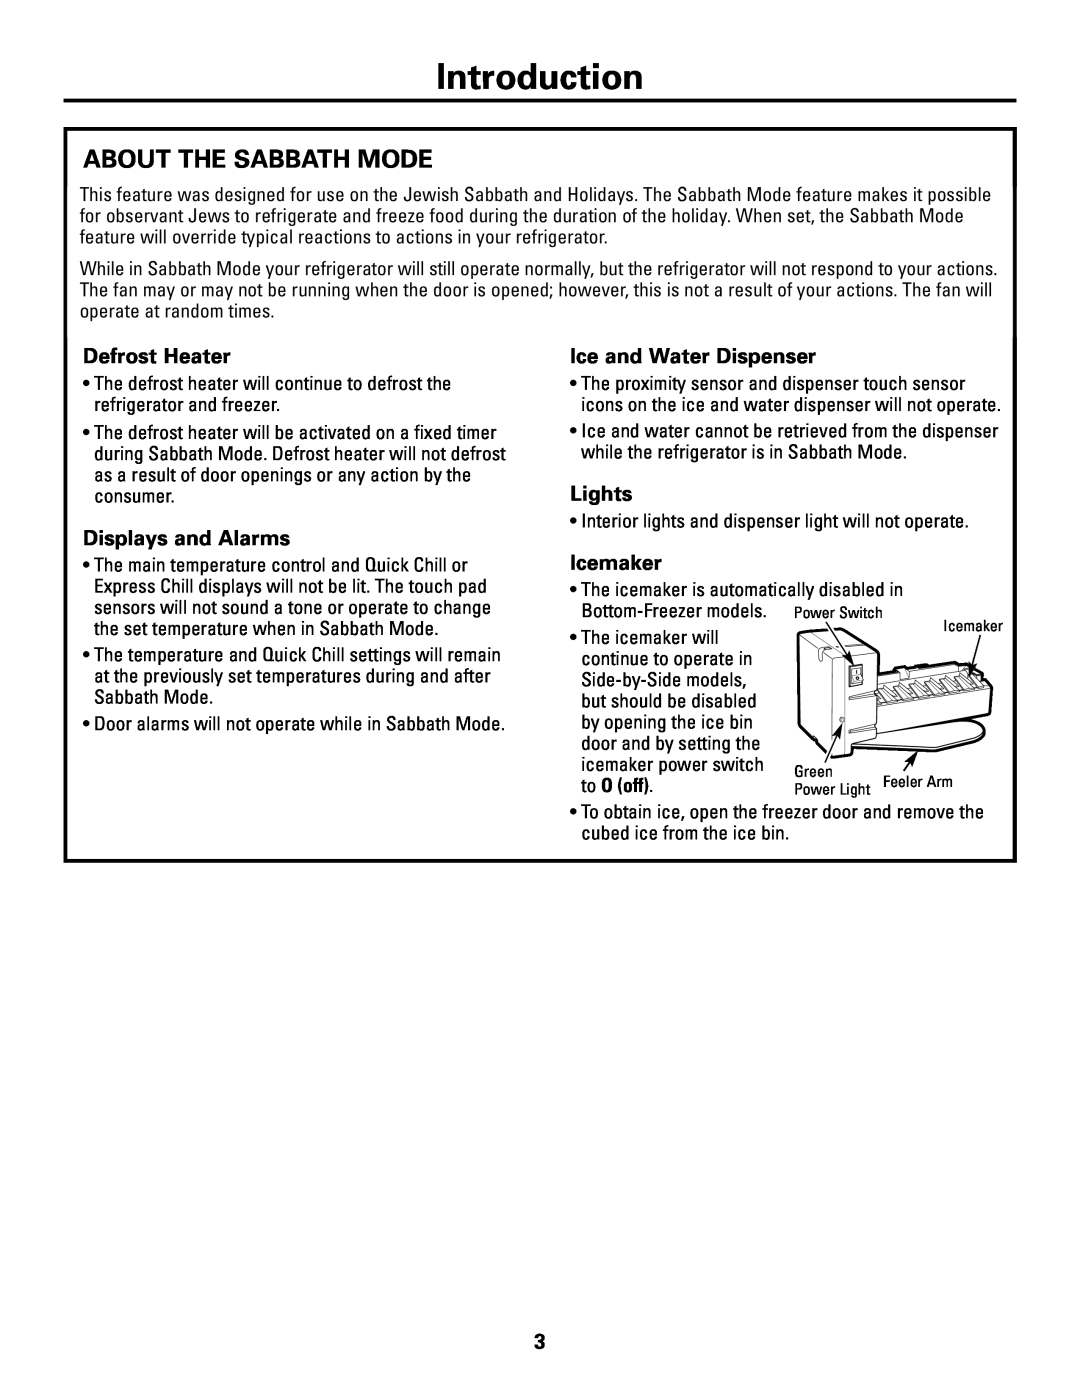 GE Monogram ZSAB1 Introduction, About The Sabbath Mode, to O off, Defrost Heater, Displays and Alarms, Lights, Icemaker 